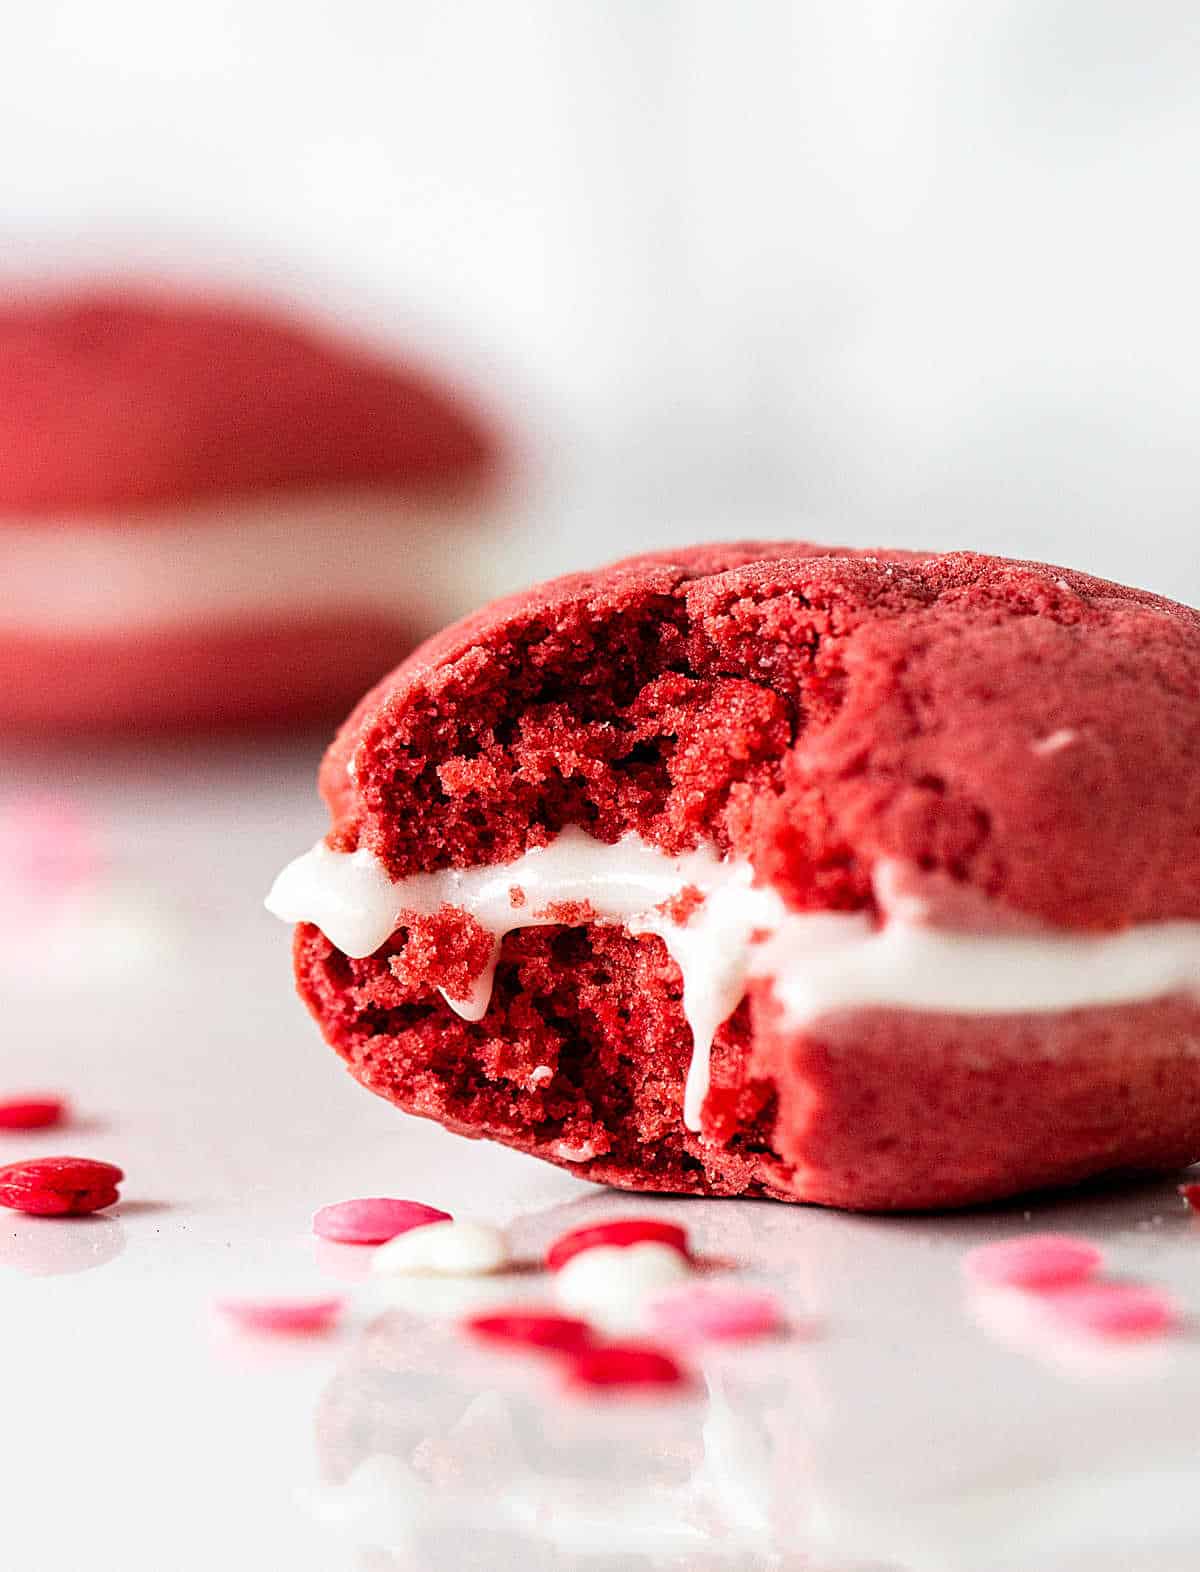 Red Velvet Whoopie Pies from Vintage Kitchen on foodiecrush.com